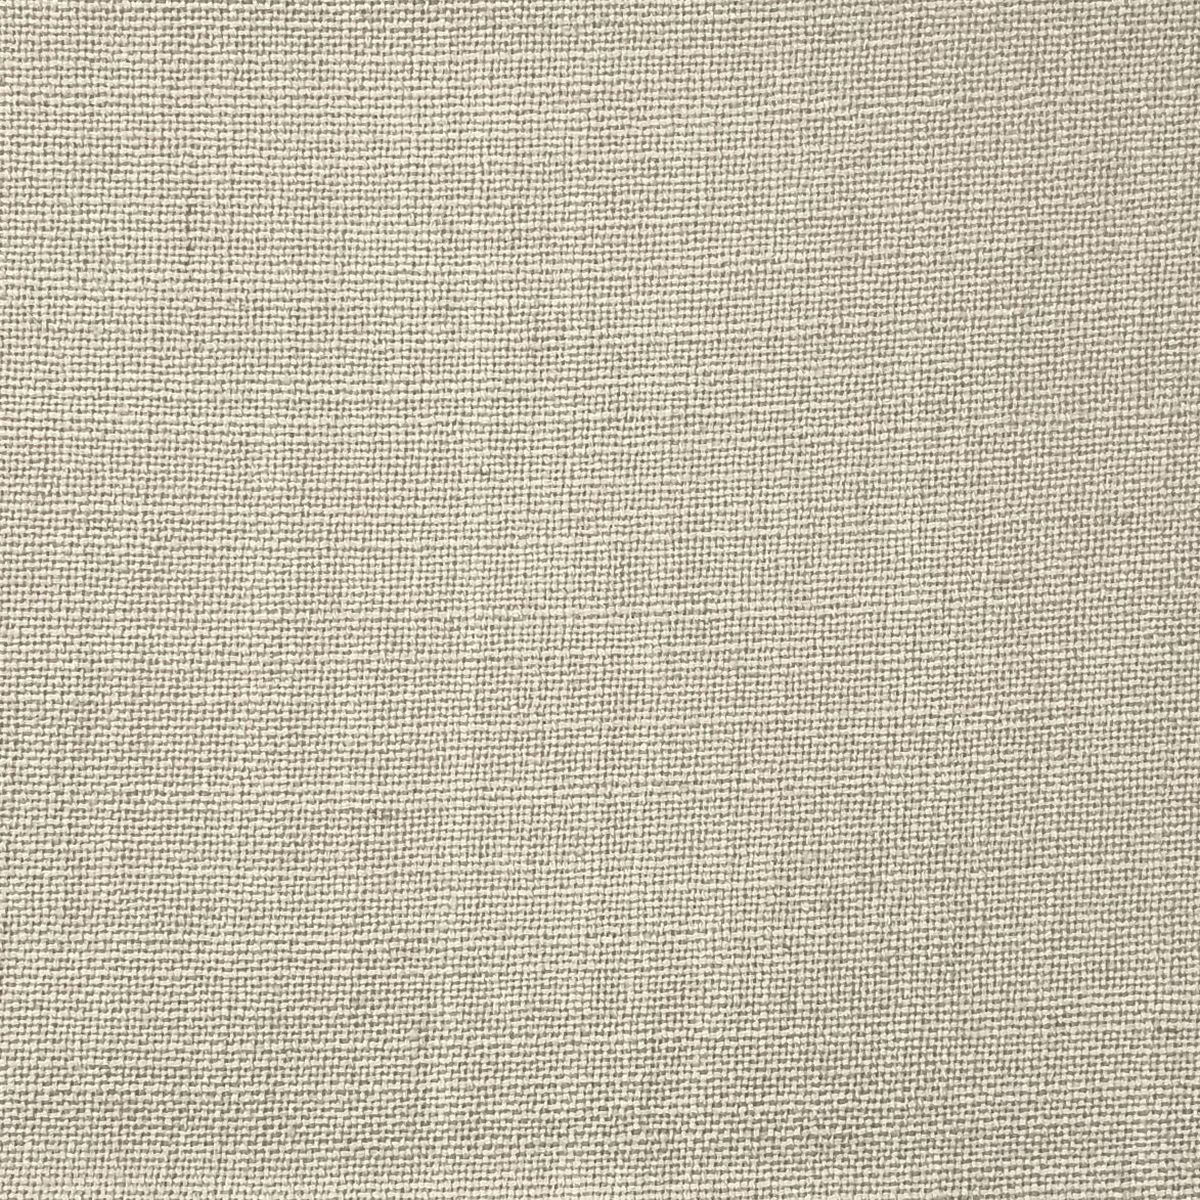 Linum Gravel Fabric by Chatham Glyn